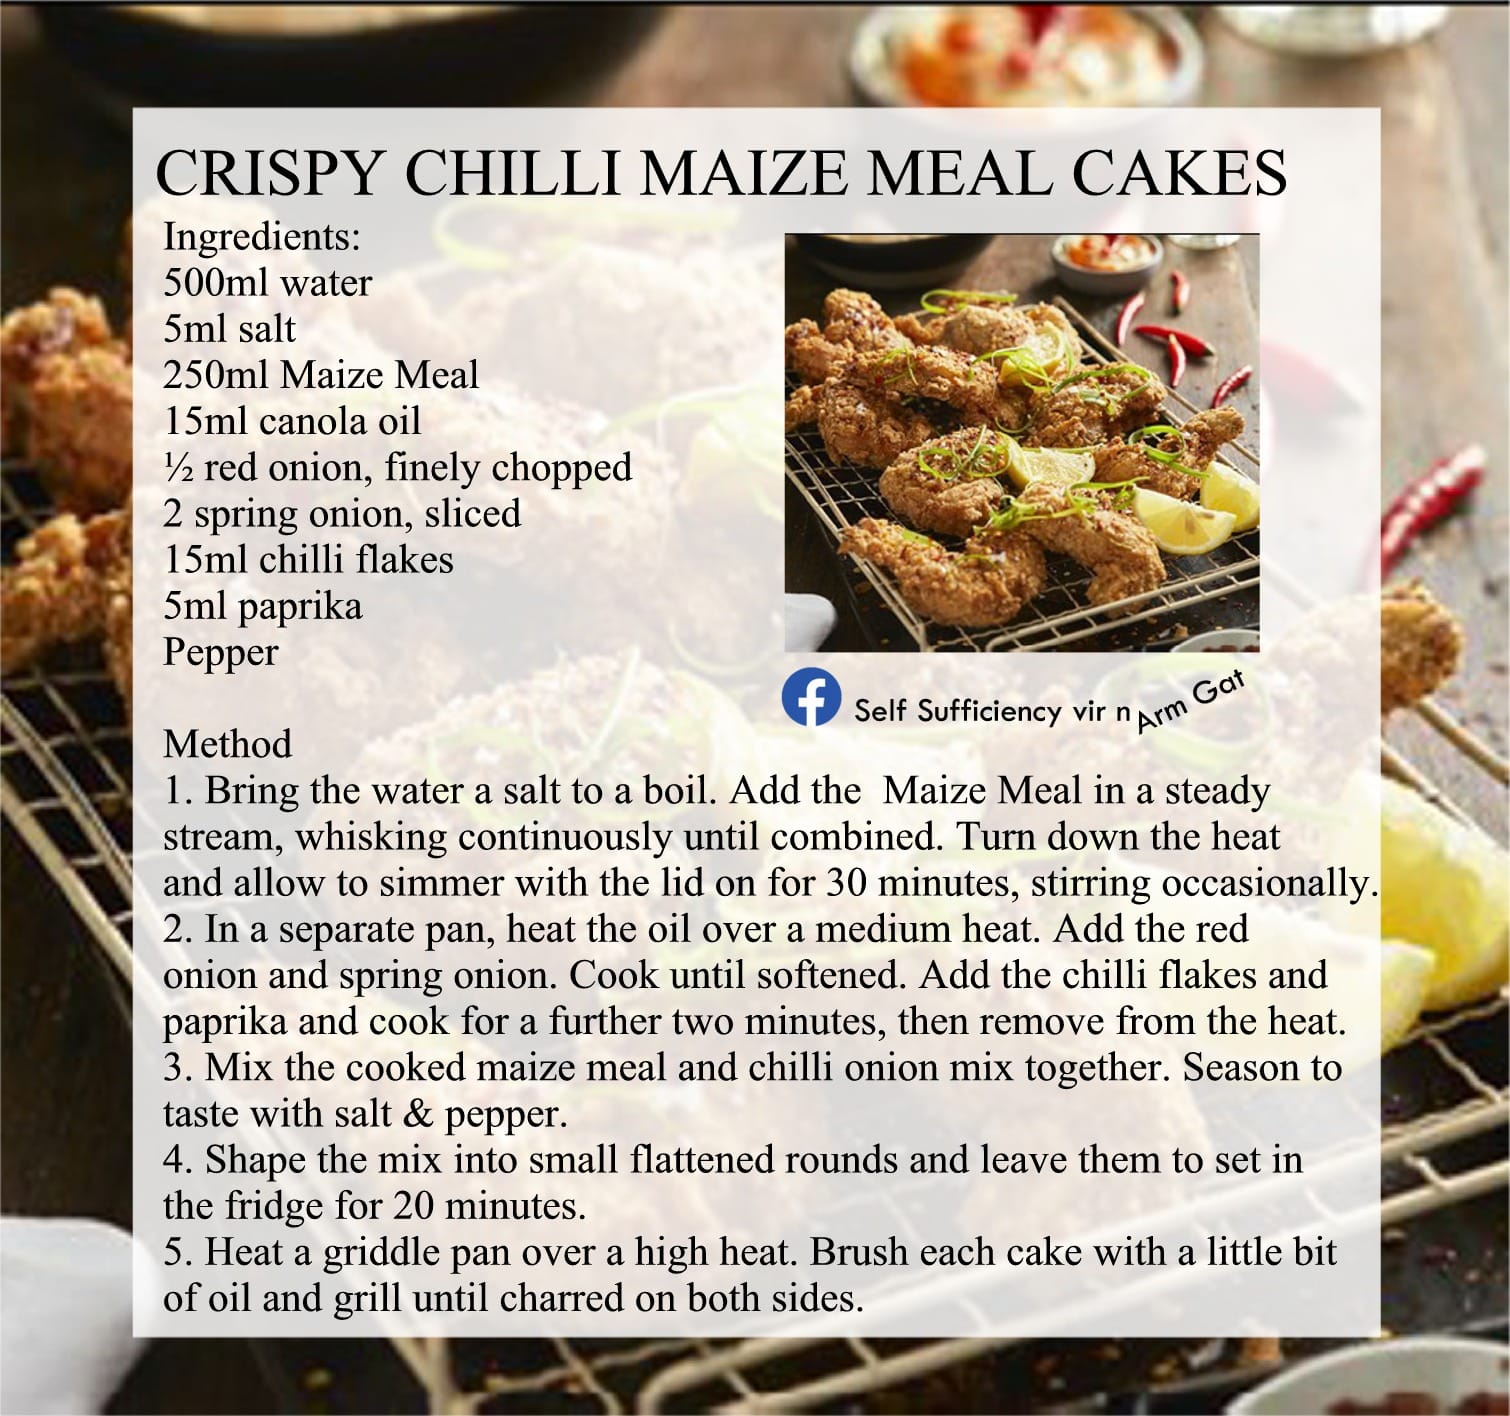 Crispy Chilli Maize Meal Cakes